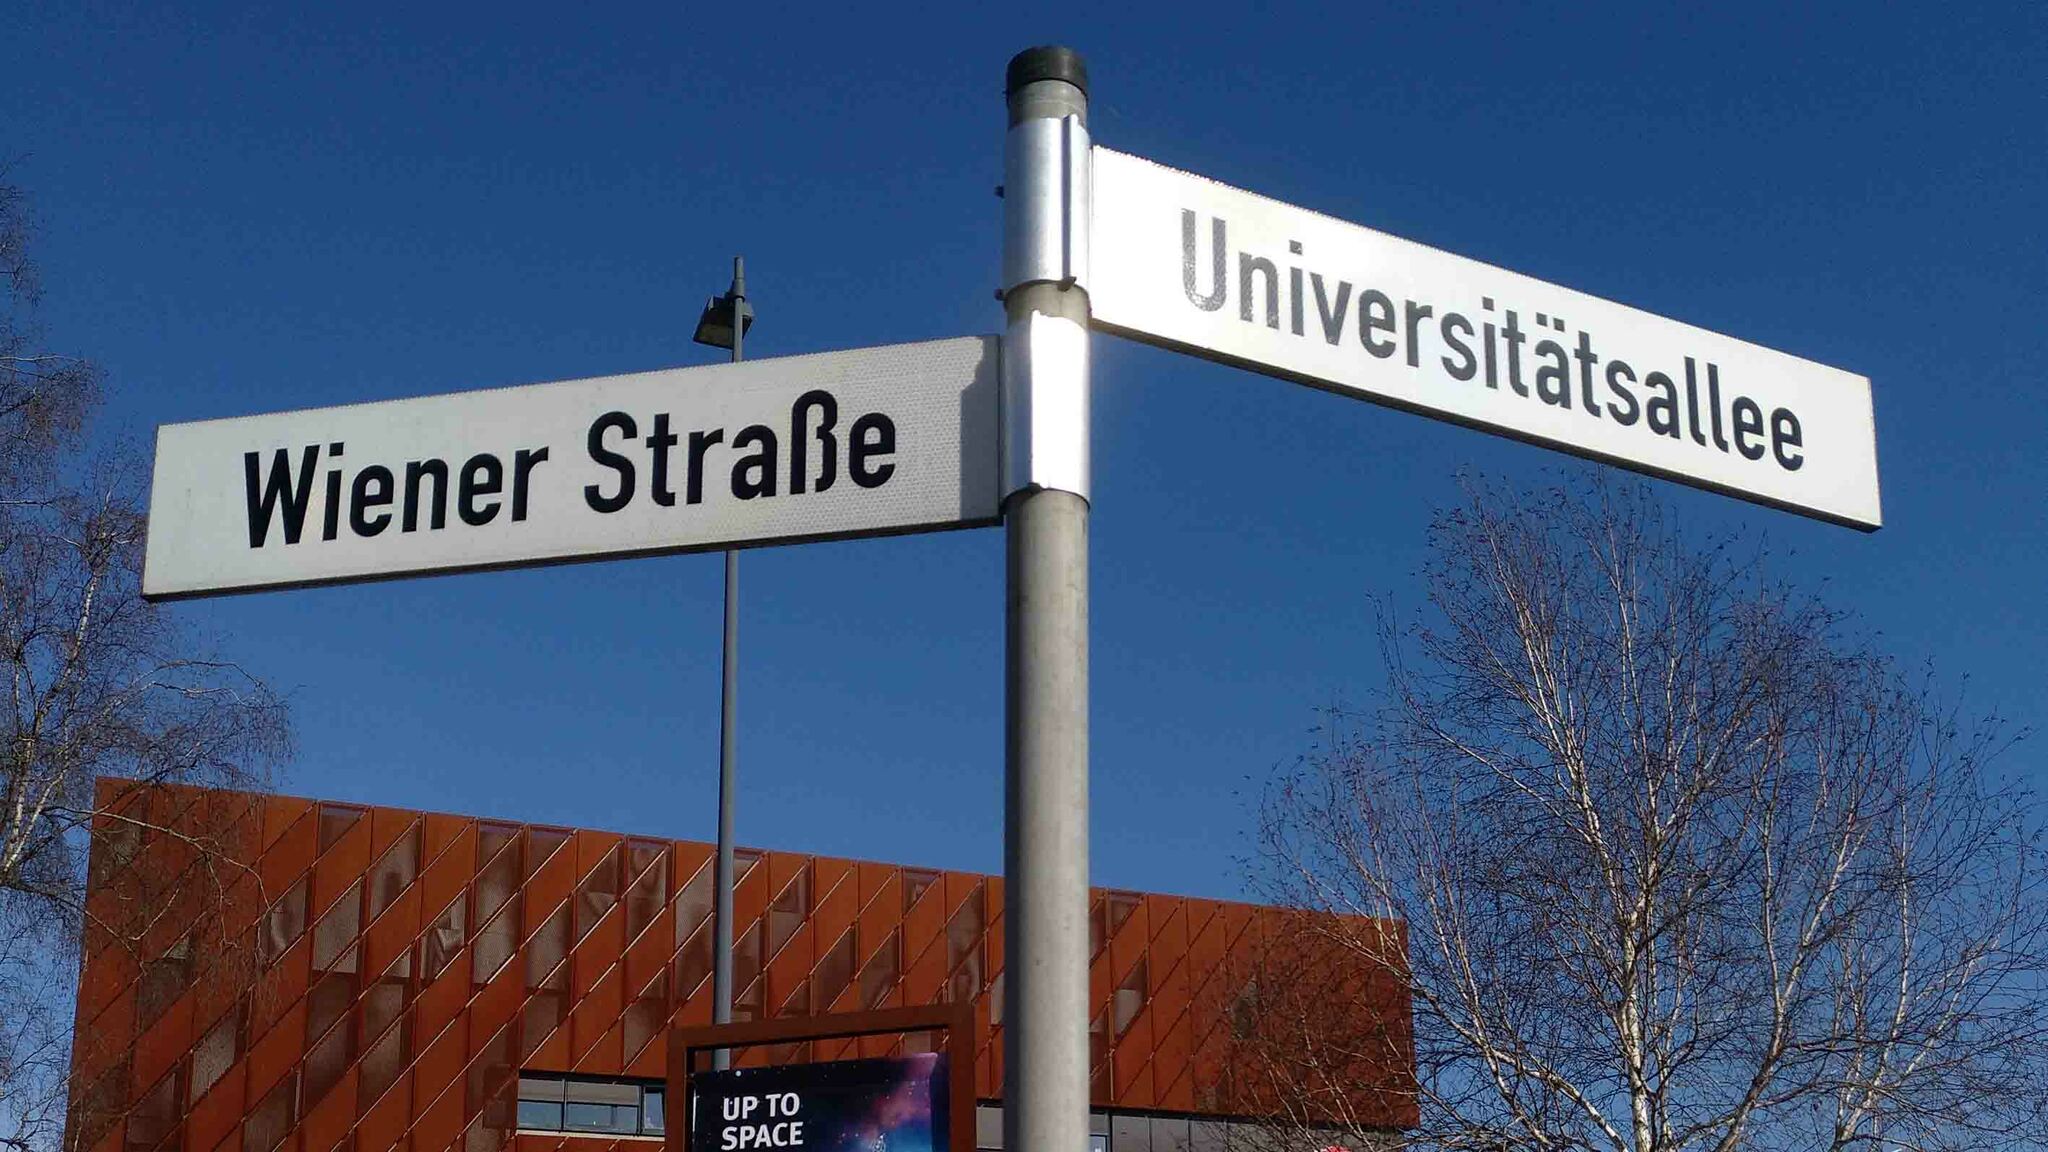 It took a few years until the street names for the university campus, which are still around today, were decided on.